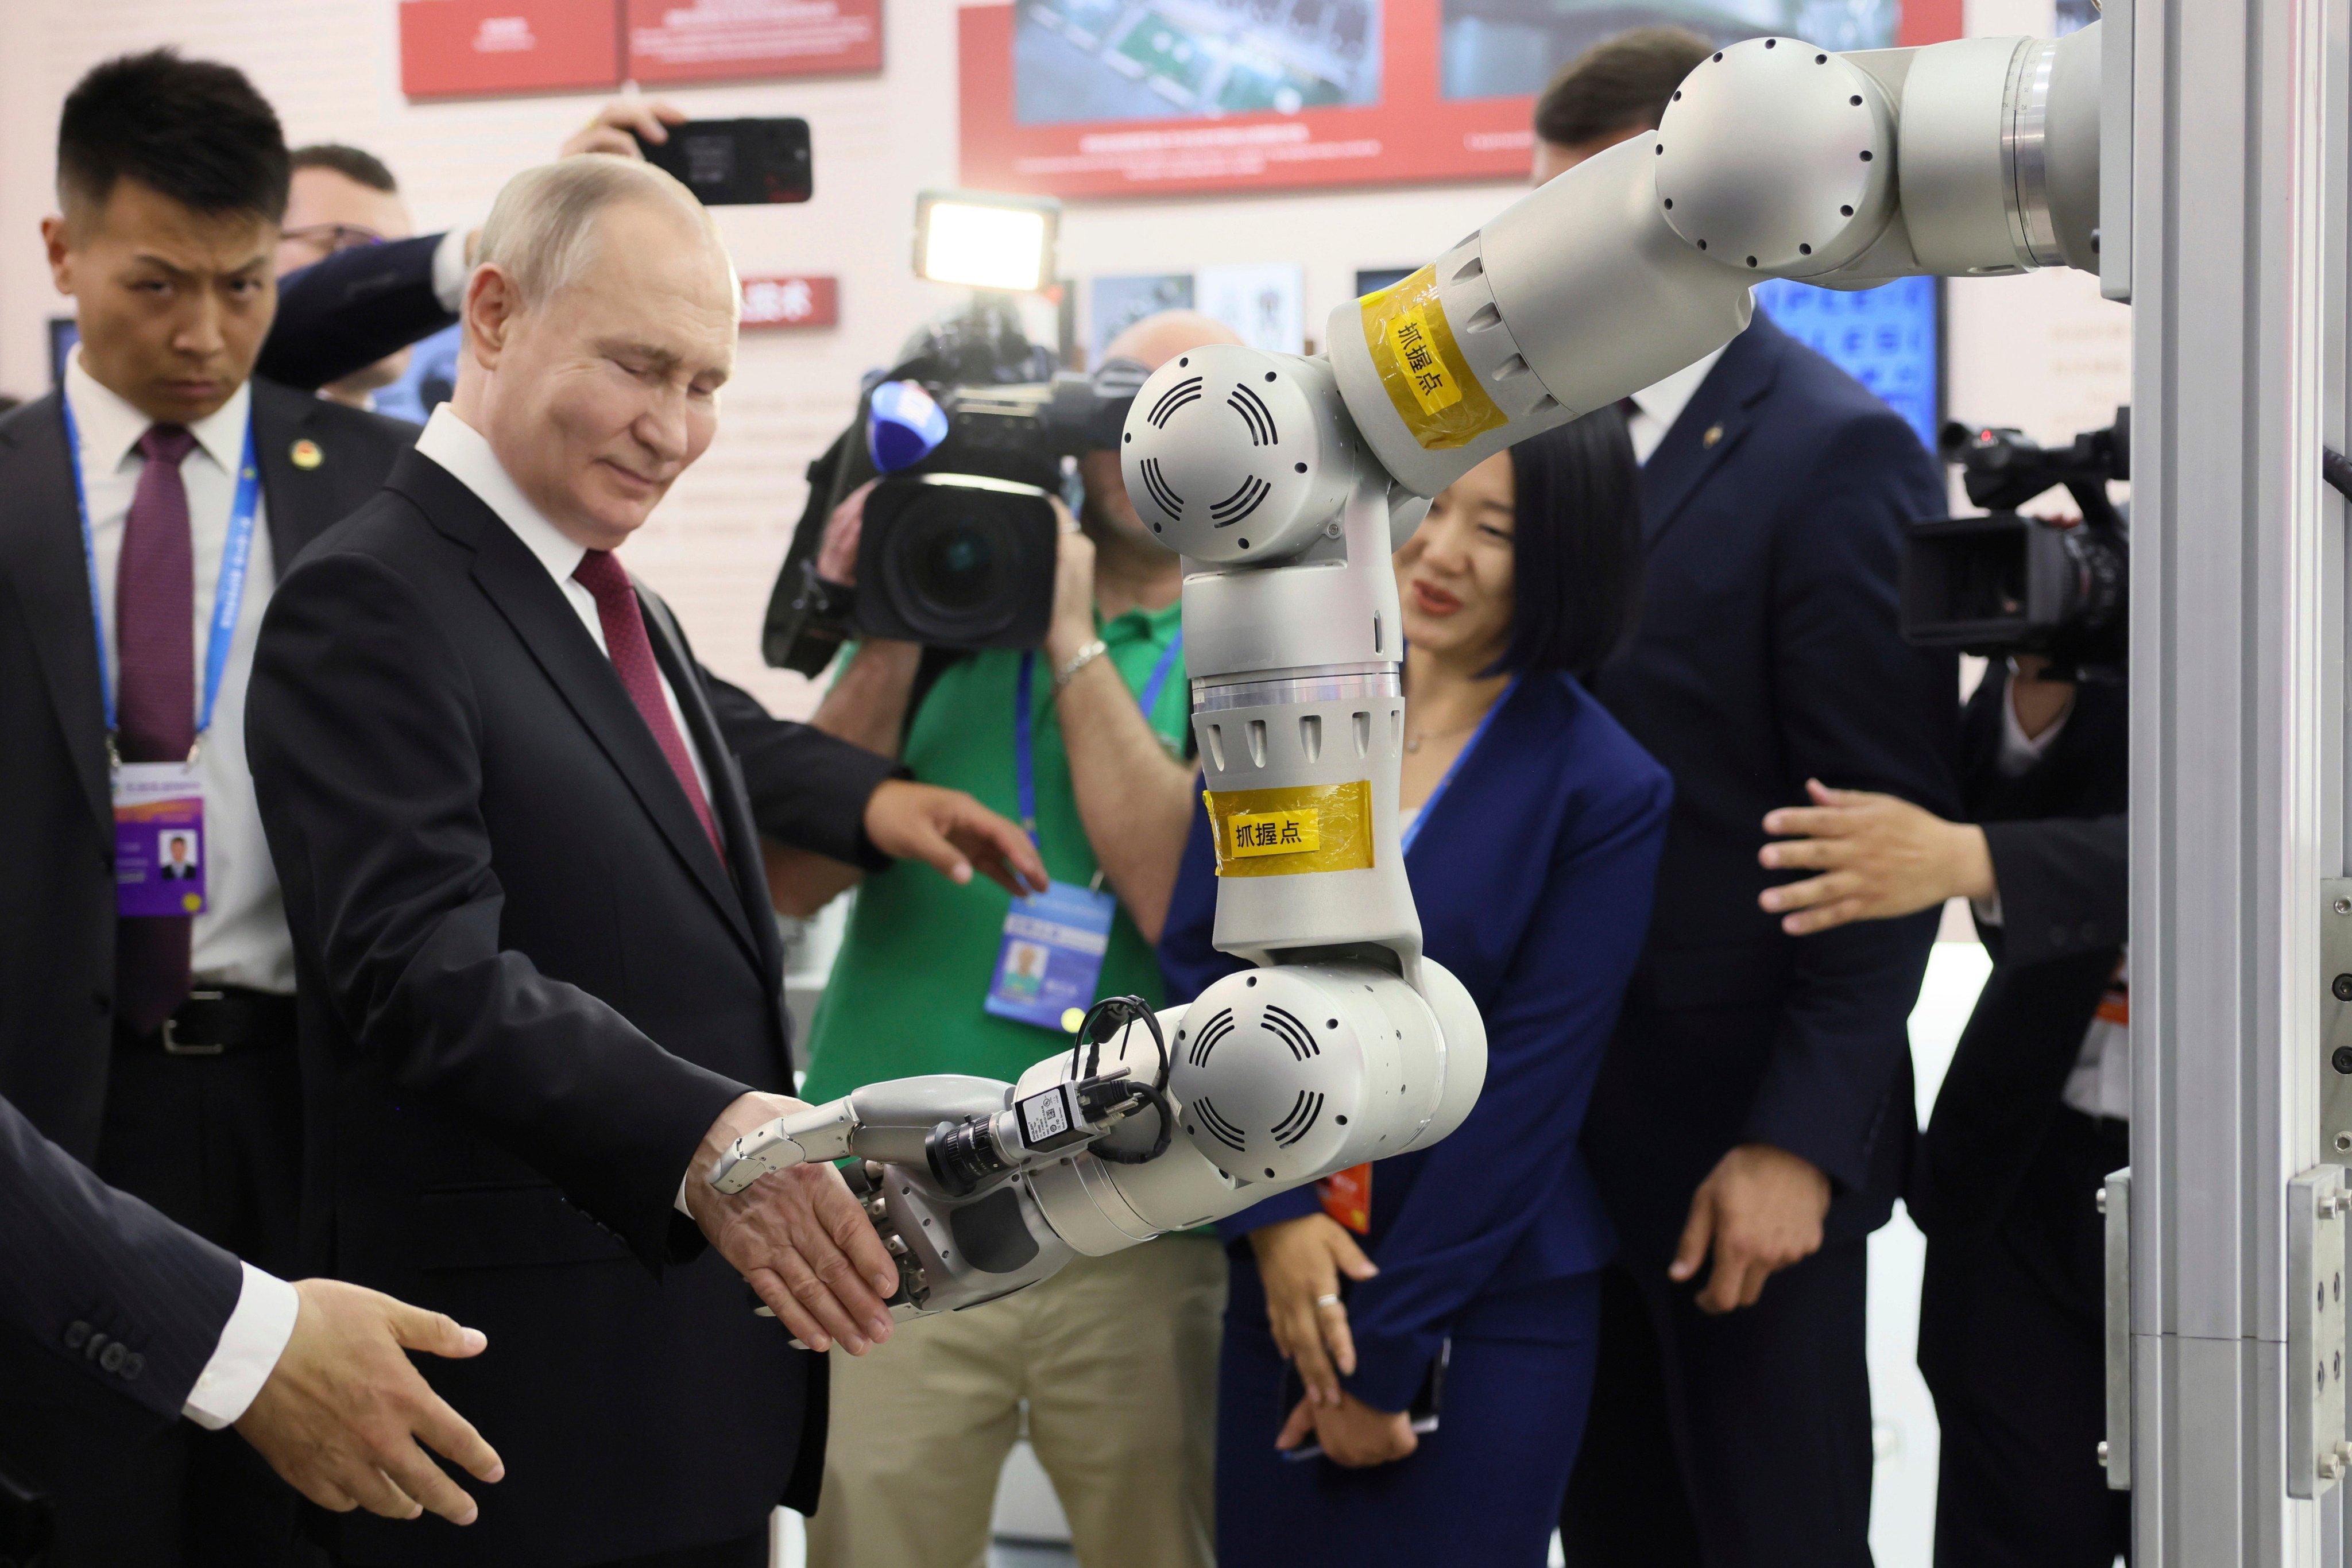 Russian President Vladimir Putin visits an exhibition at the Harbin Institute of Technology in Heilongjiang province in northeastern China on May 17. Photo: Sputnik, Kremlin Pool Photo via AP